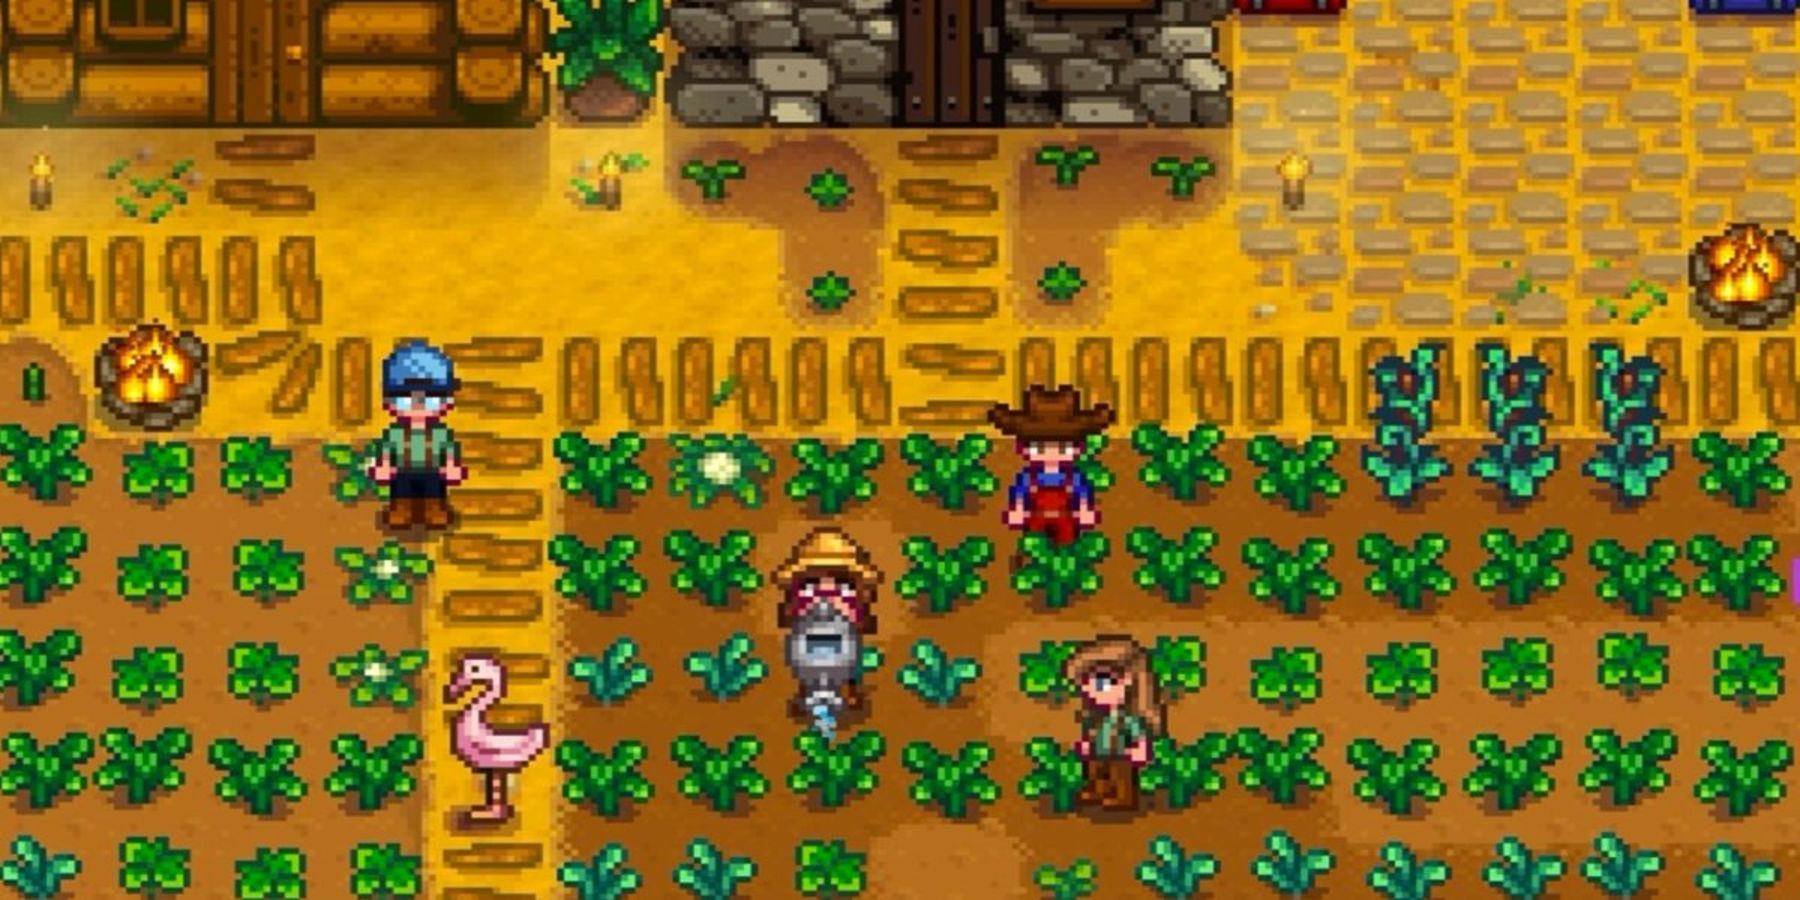 Stardew Valley multiplayer co-op mode is fun, if nothing new - Polygon